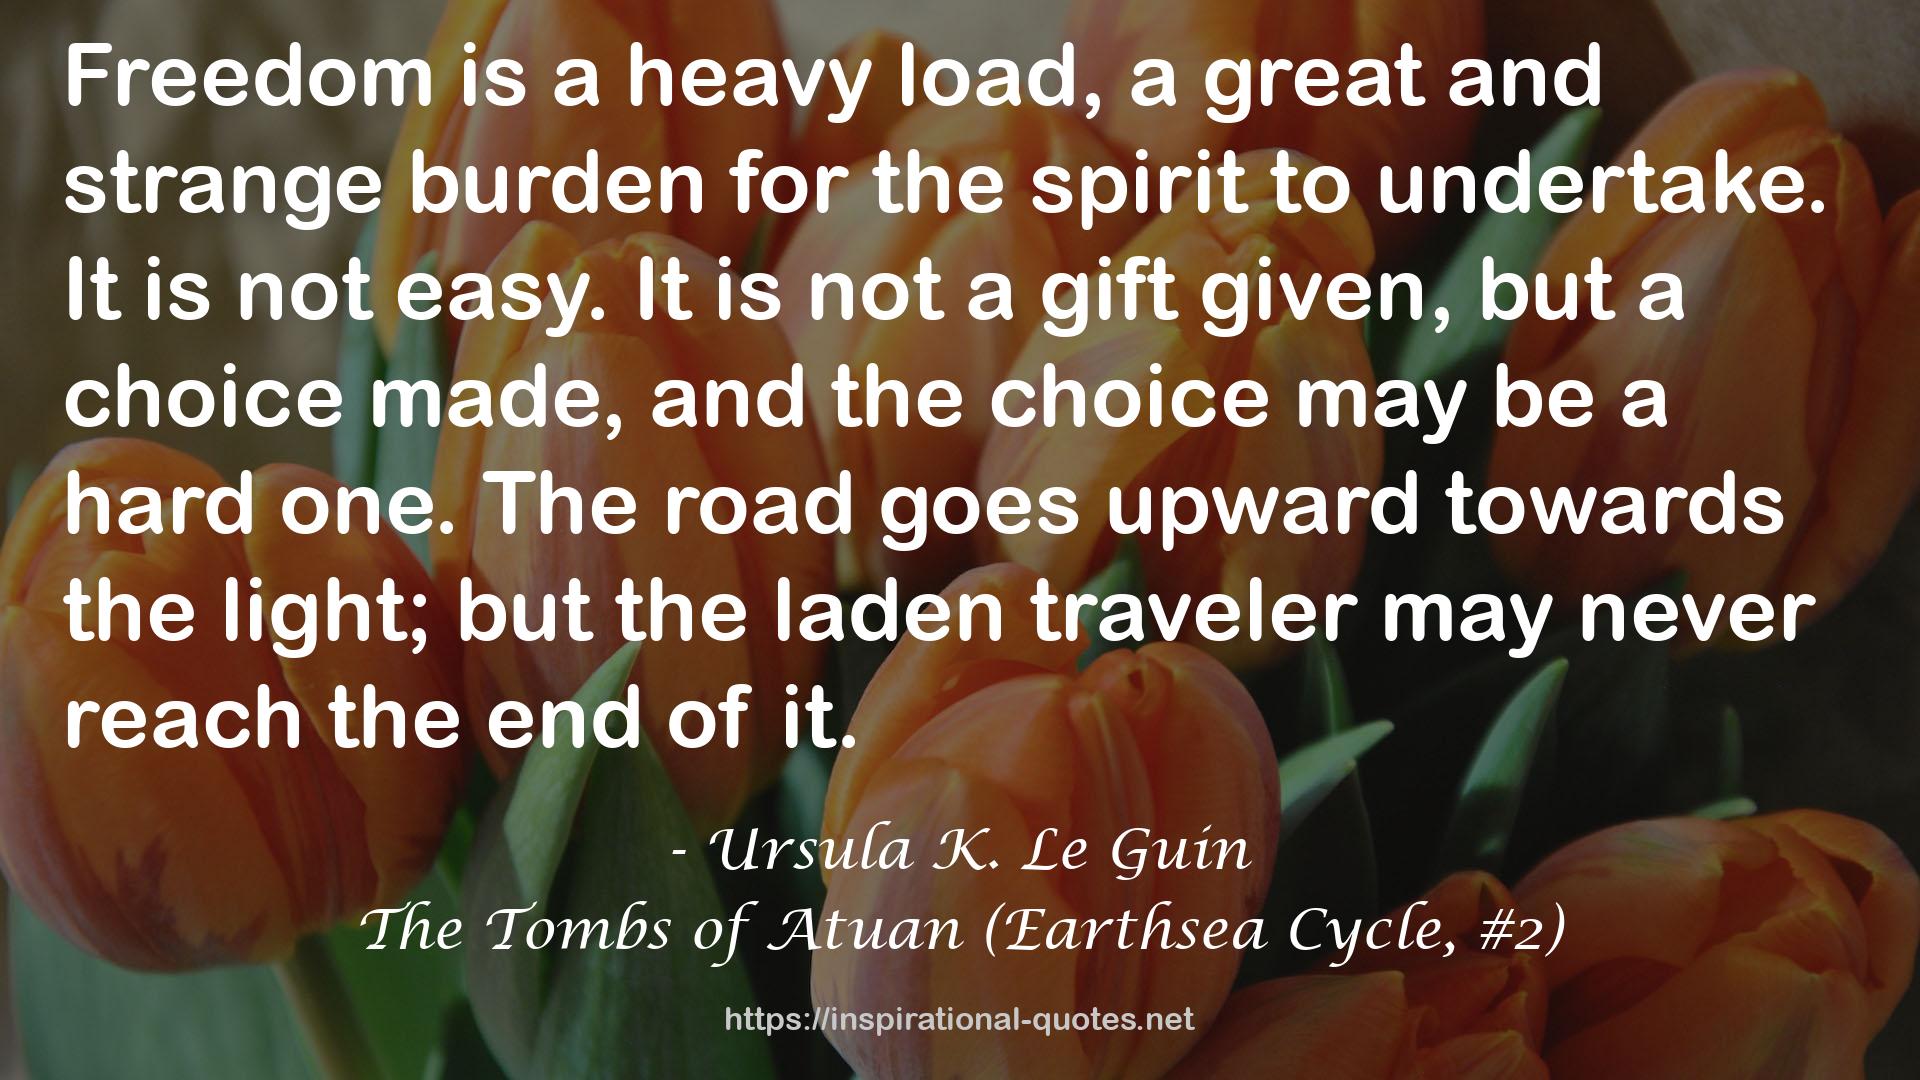 The Tombs of Atuan (Earthsea Cycle, #2) QUOTES